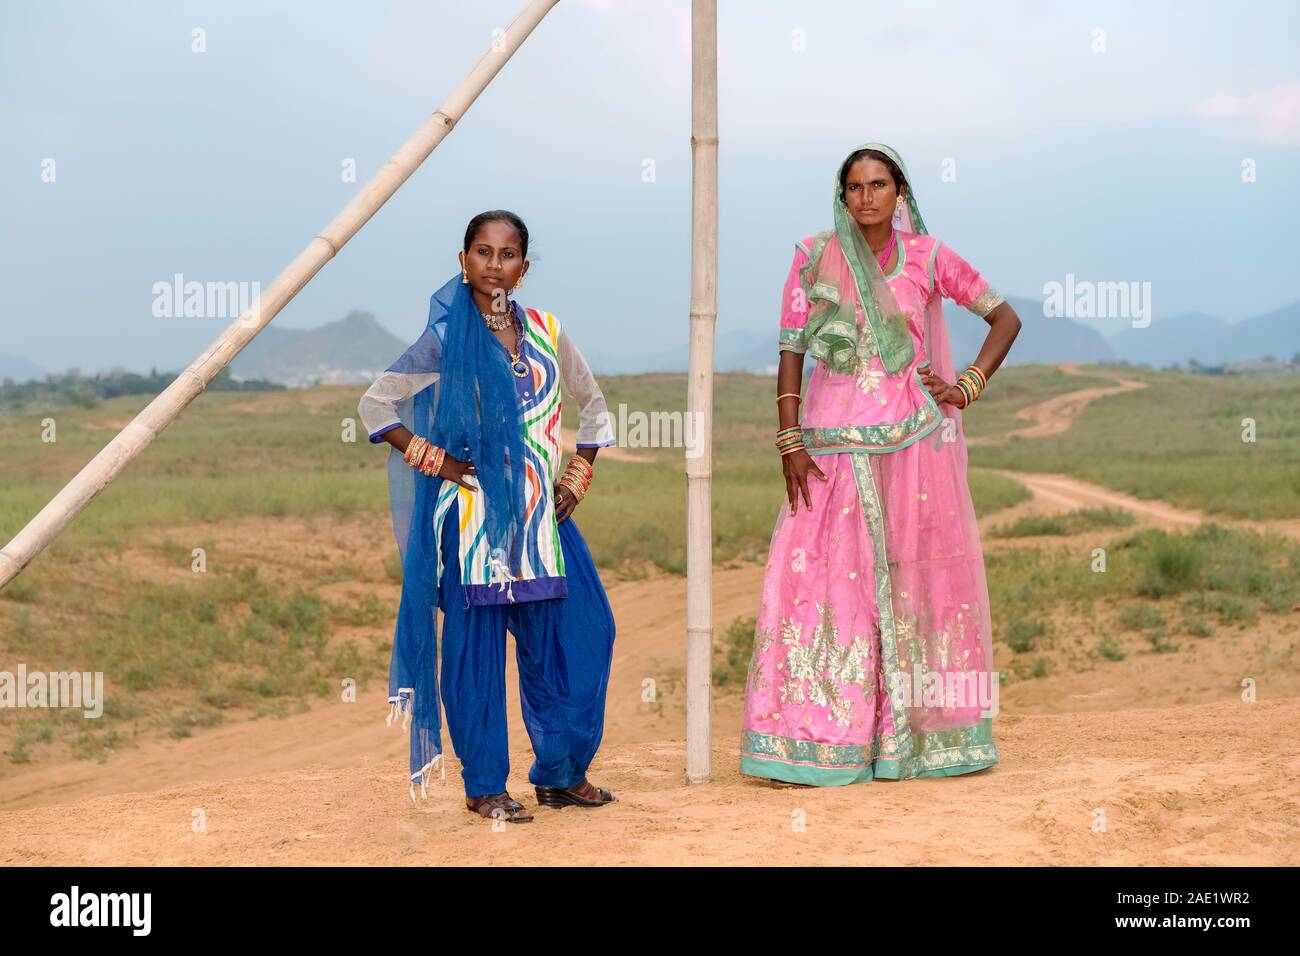 PUSHKAR, INDIA - NOVEMBER 07, 2019: Portrait of two women in colorful traditional clothing and veils in Thar desert on October 31, 2019 in Pushkar, Ra Stock Photo